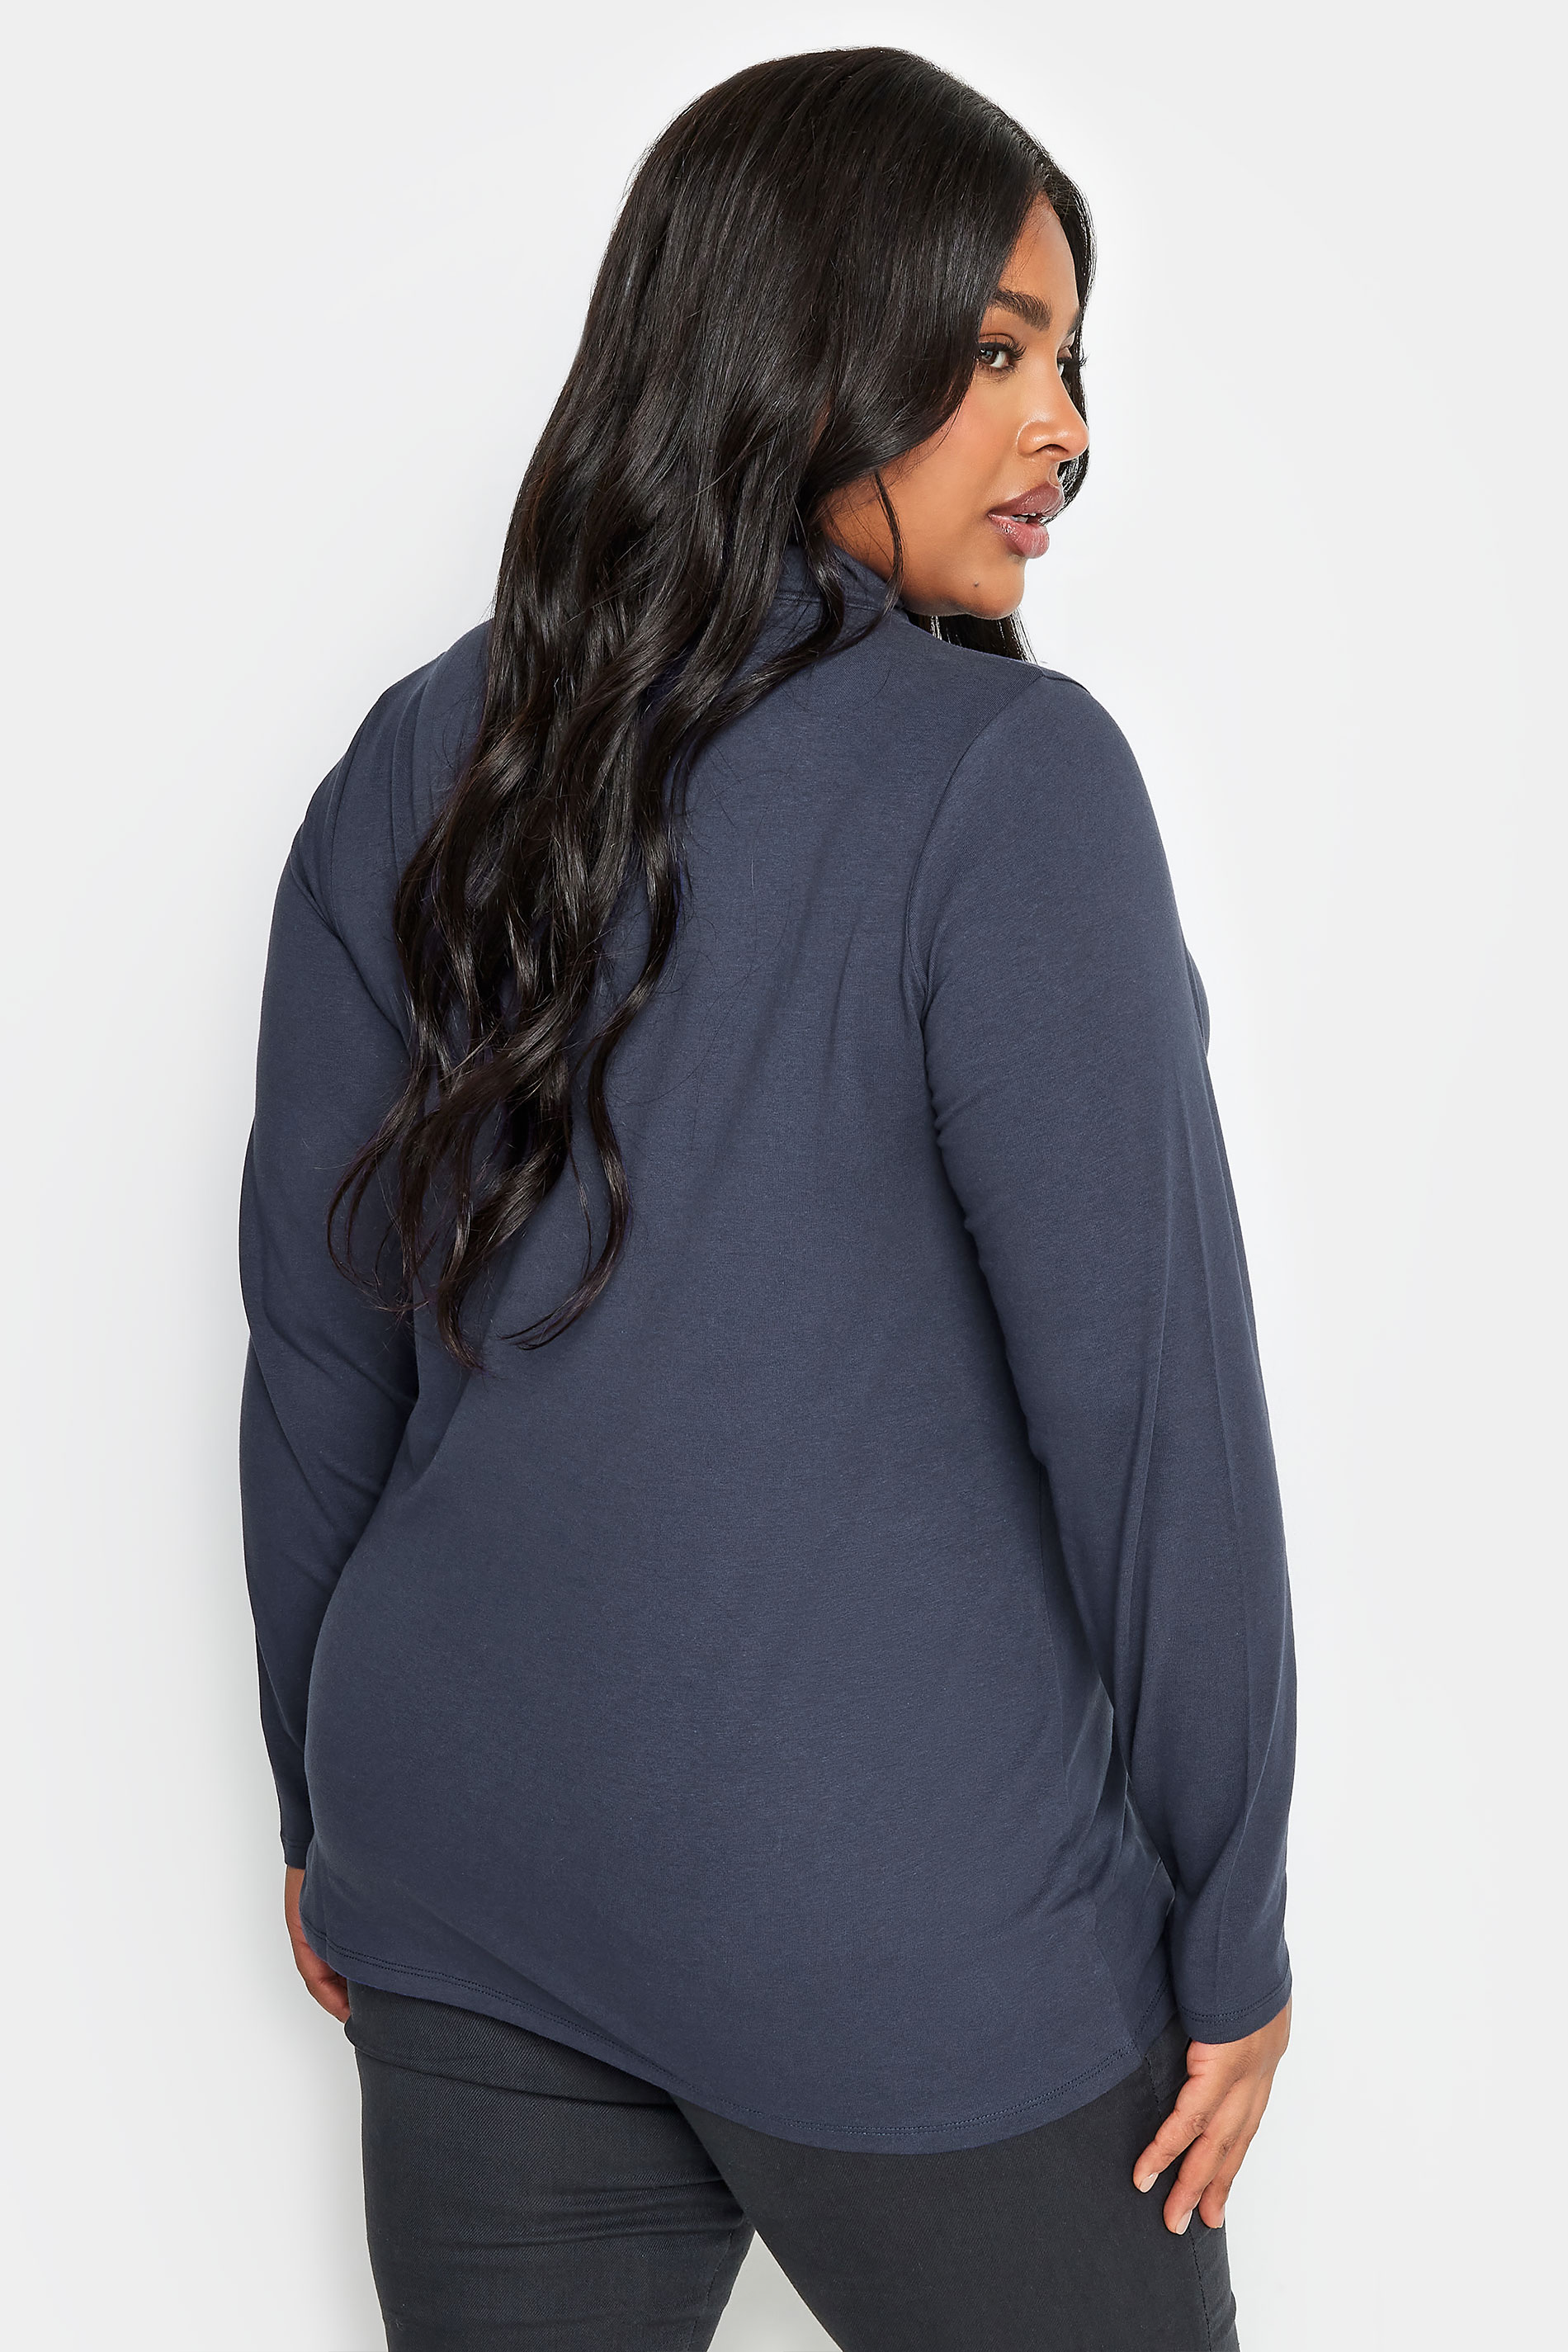 YOURS Plus Size Navy Blue Long Sleeve Turtle Neck Top | Yours Clothing 3